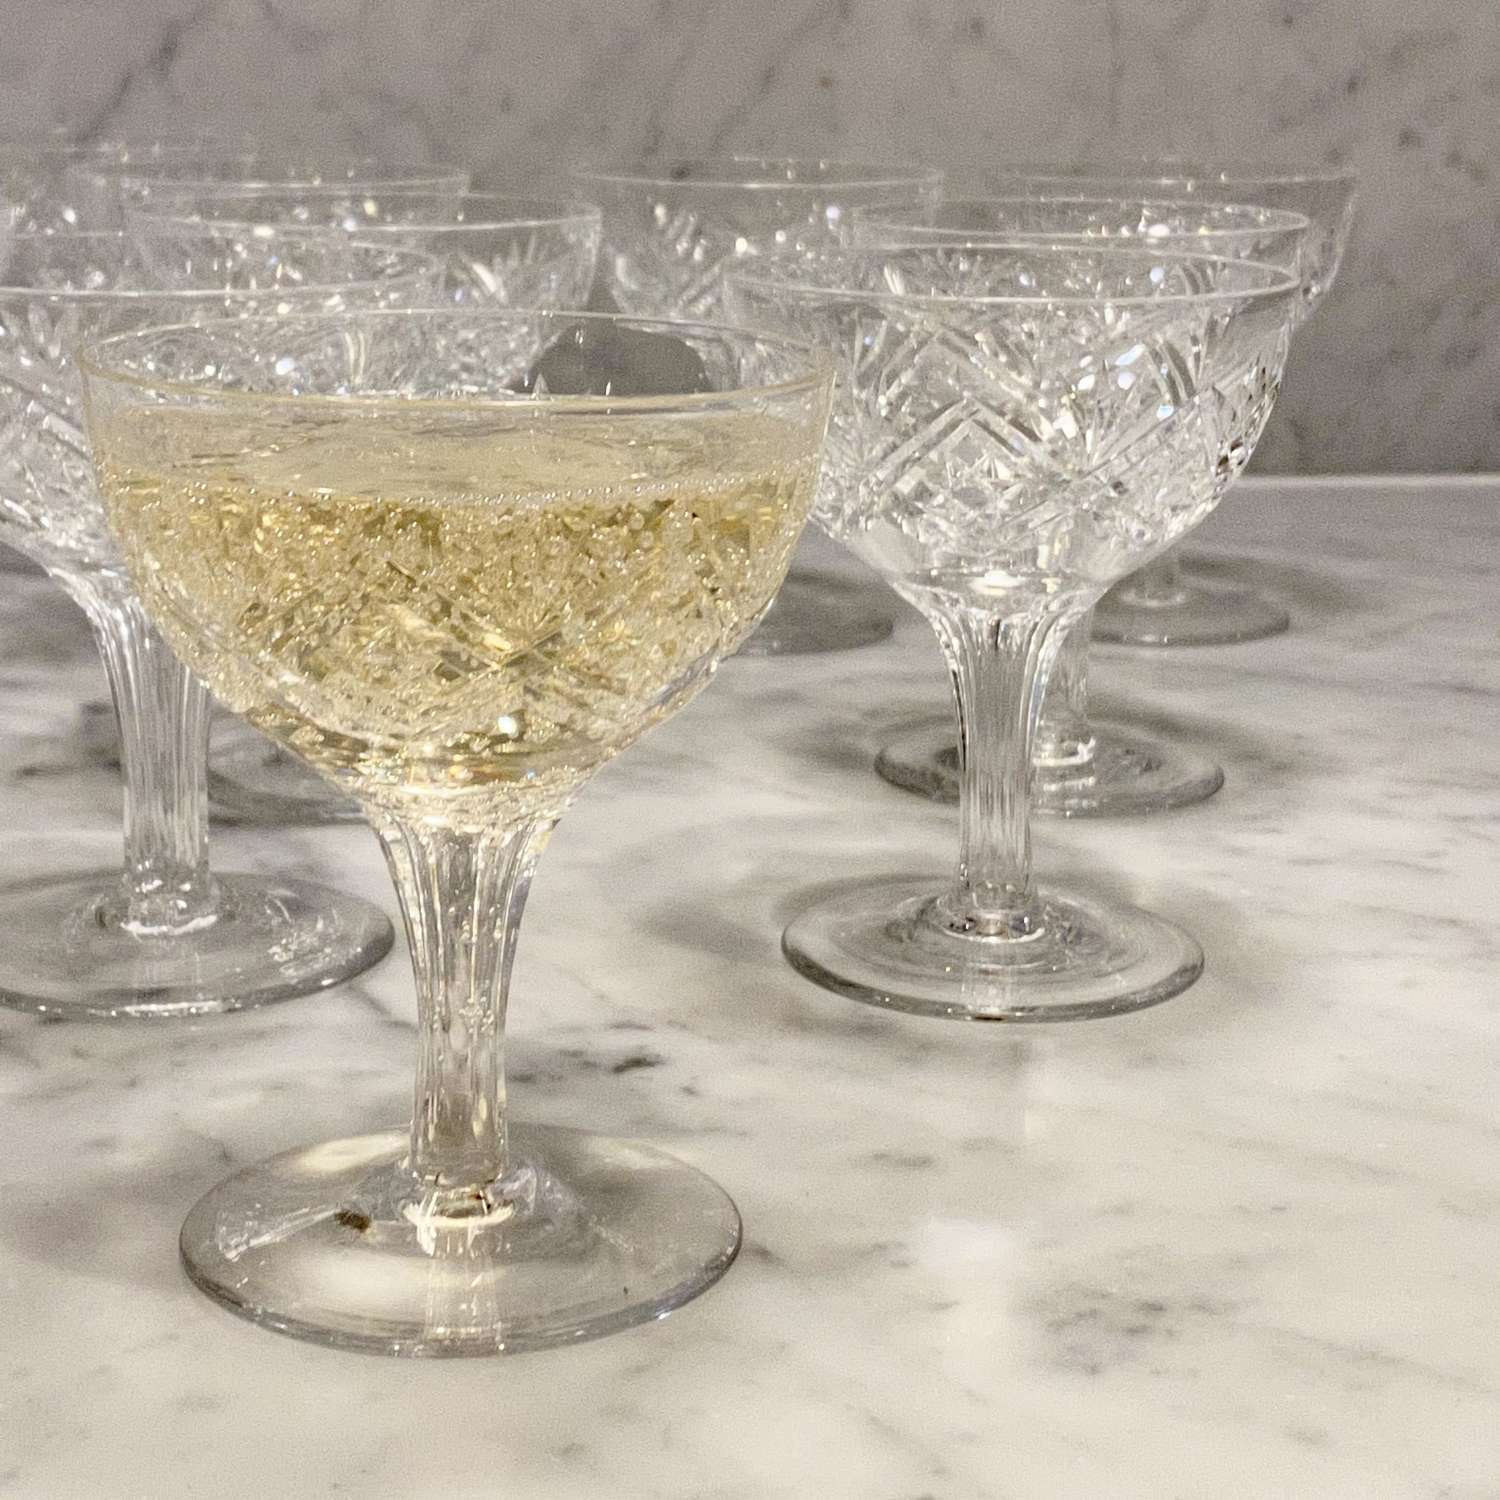 A dozen finest English crystal hollow stem champagne coupes